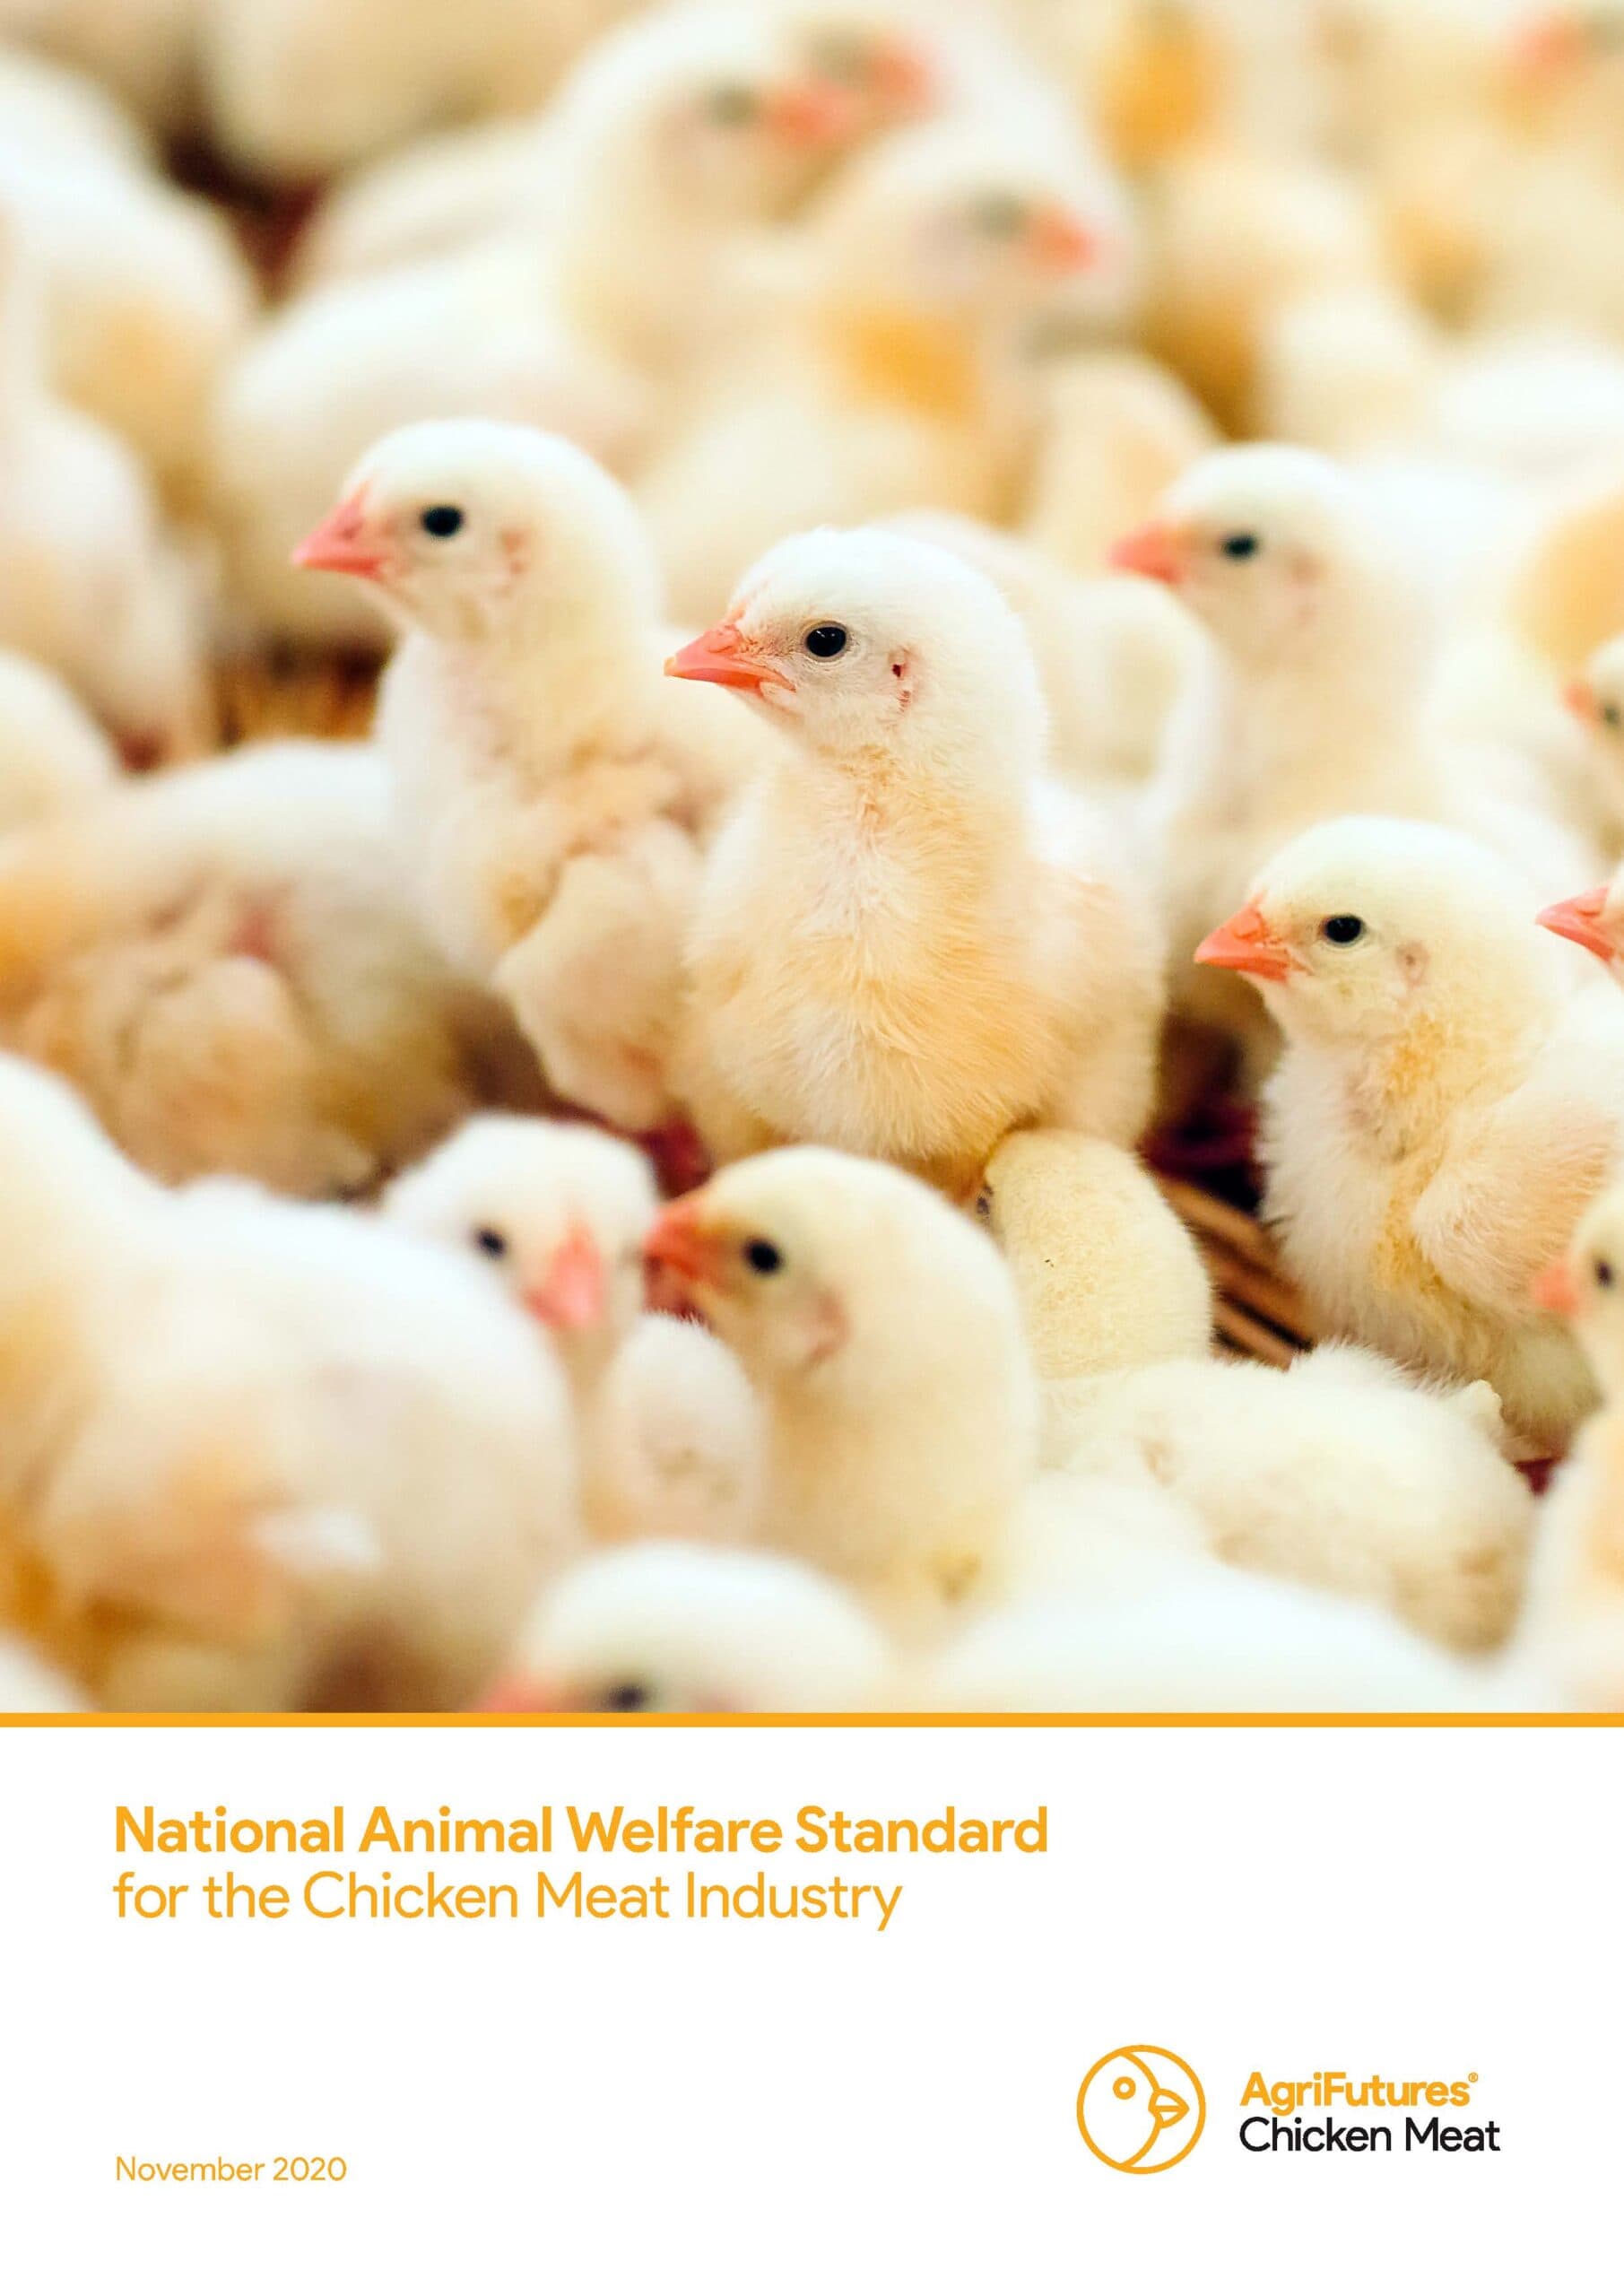 National Animal Welfare Standard for the Chicken Meat Industry - image